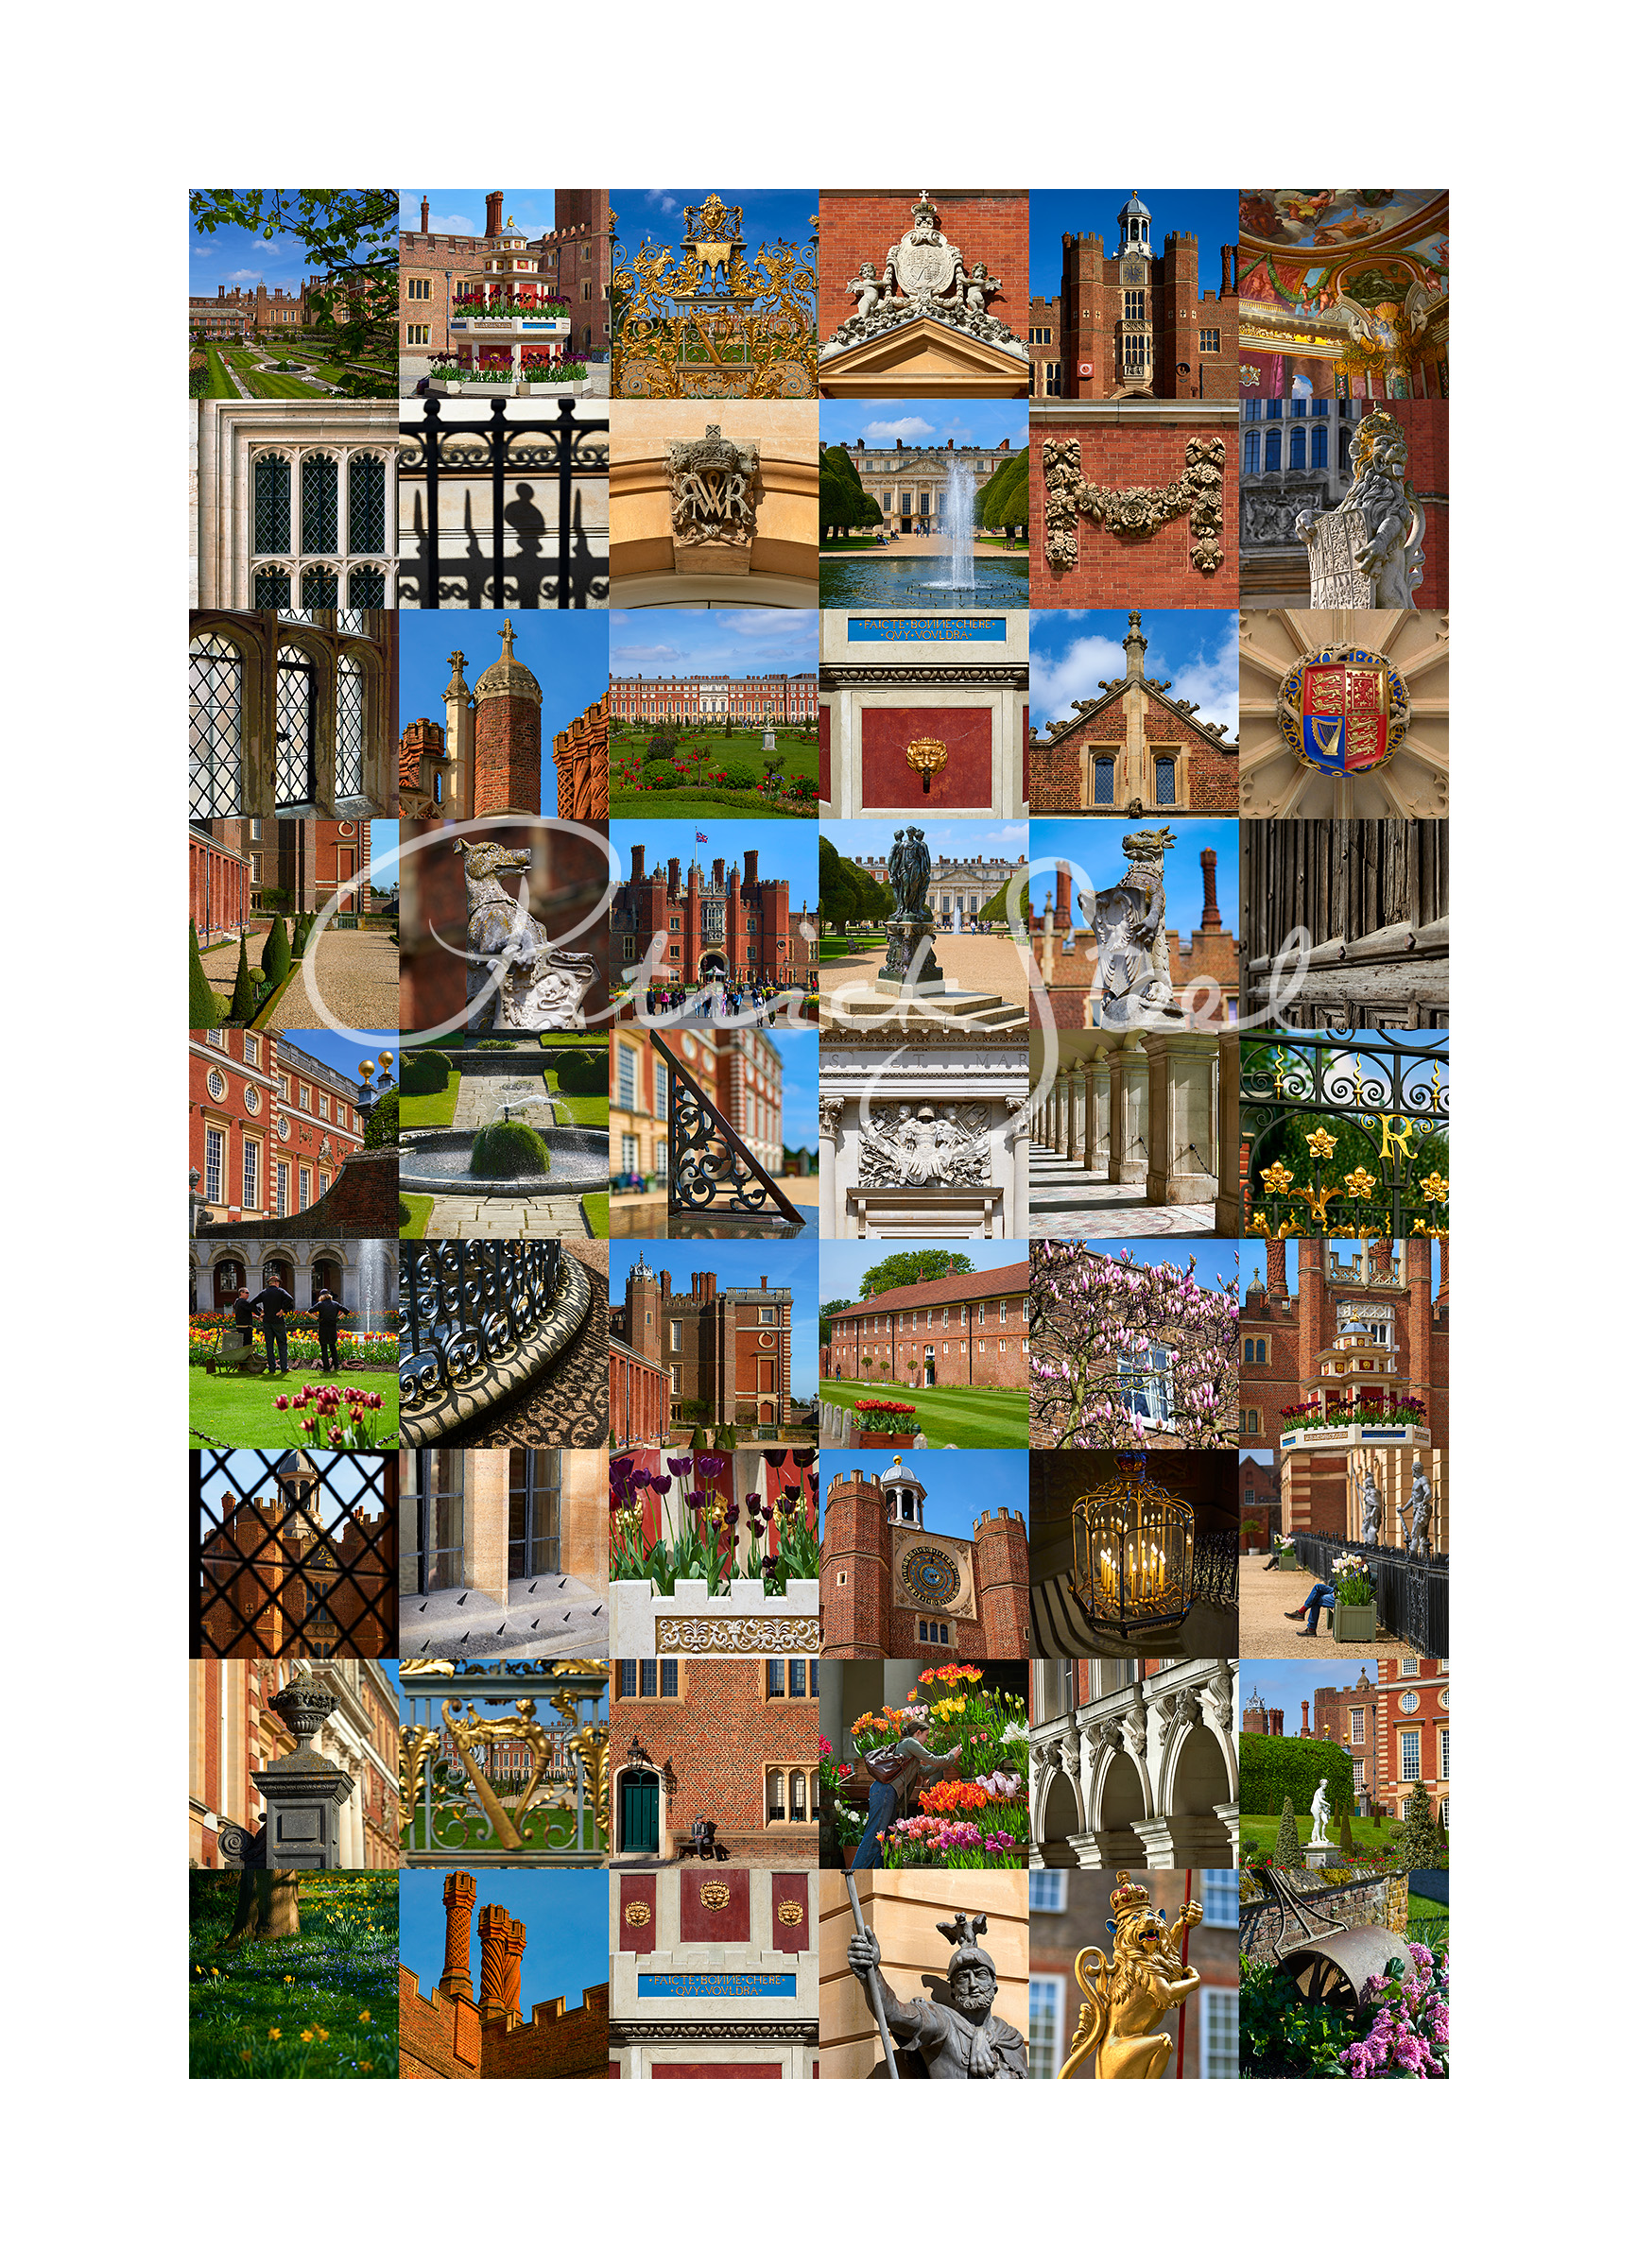 a vertical format photographic montage of hampton court palace by british photographer patrick steel